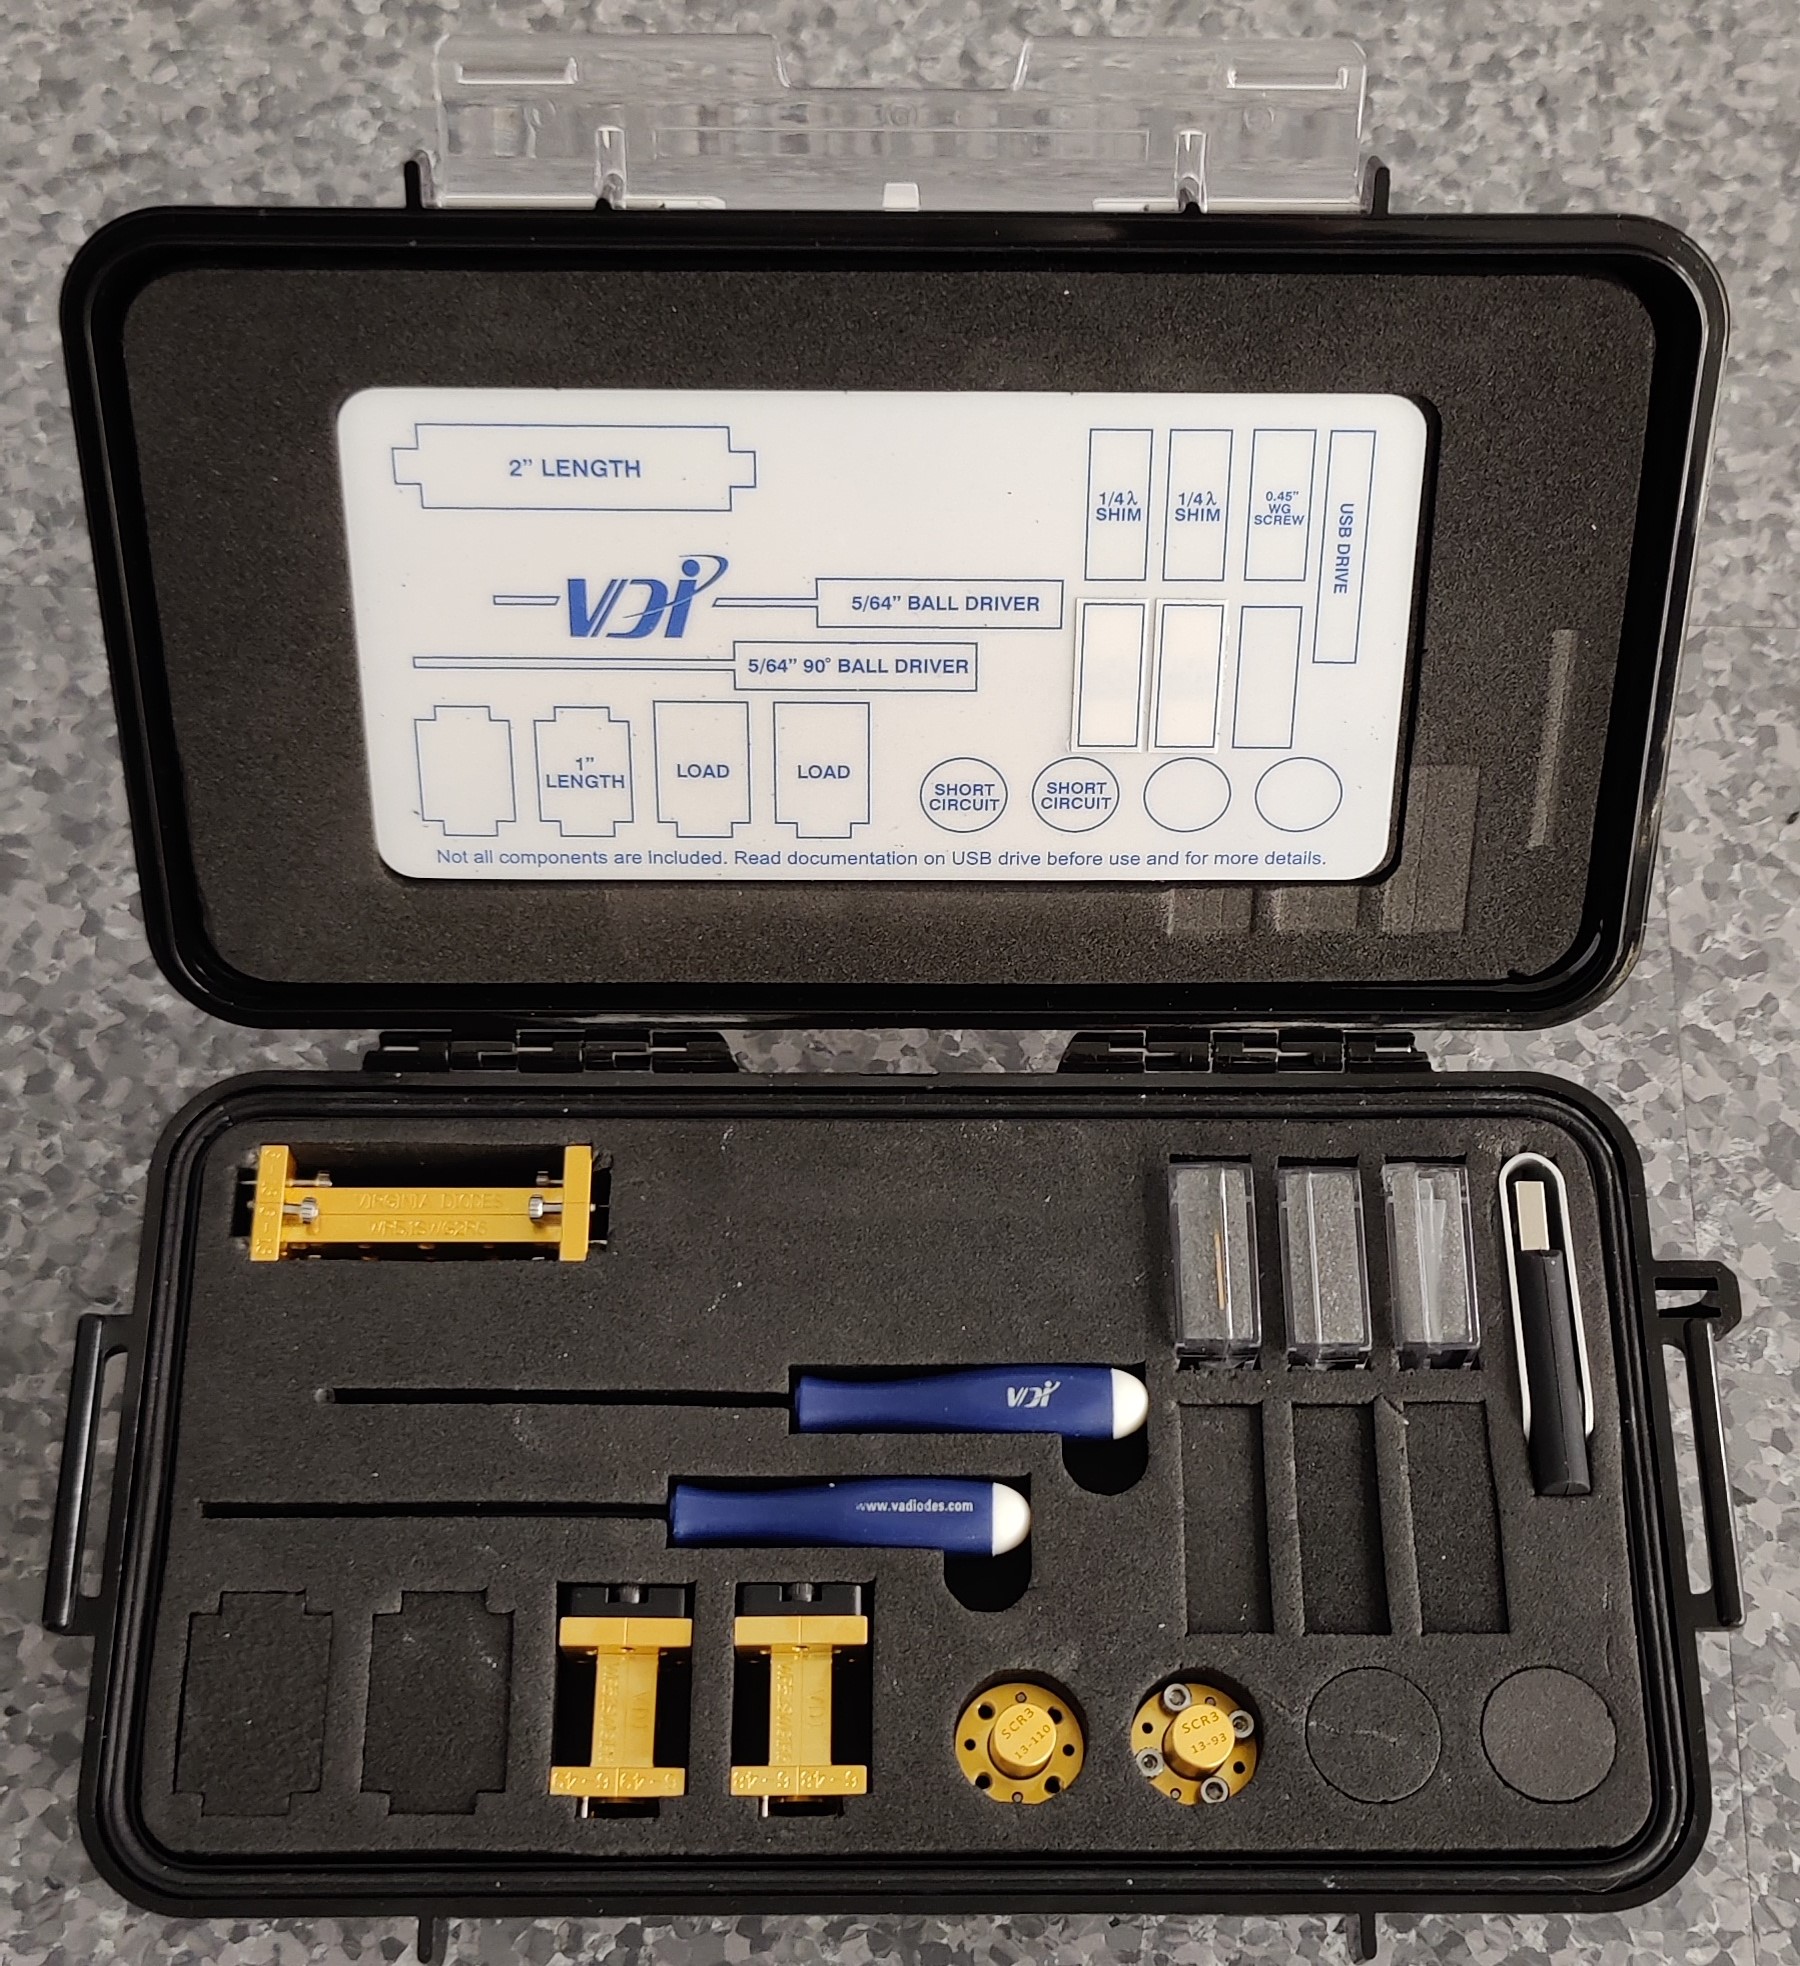 open calibration kit showing tools inside